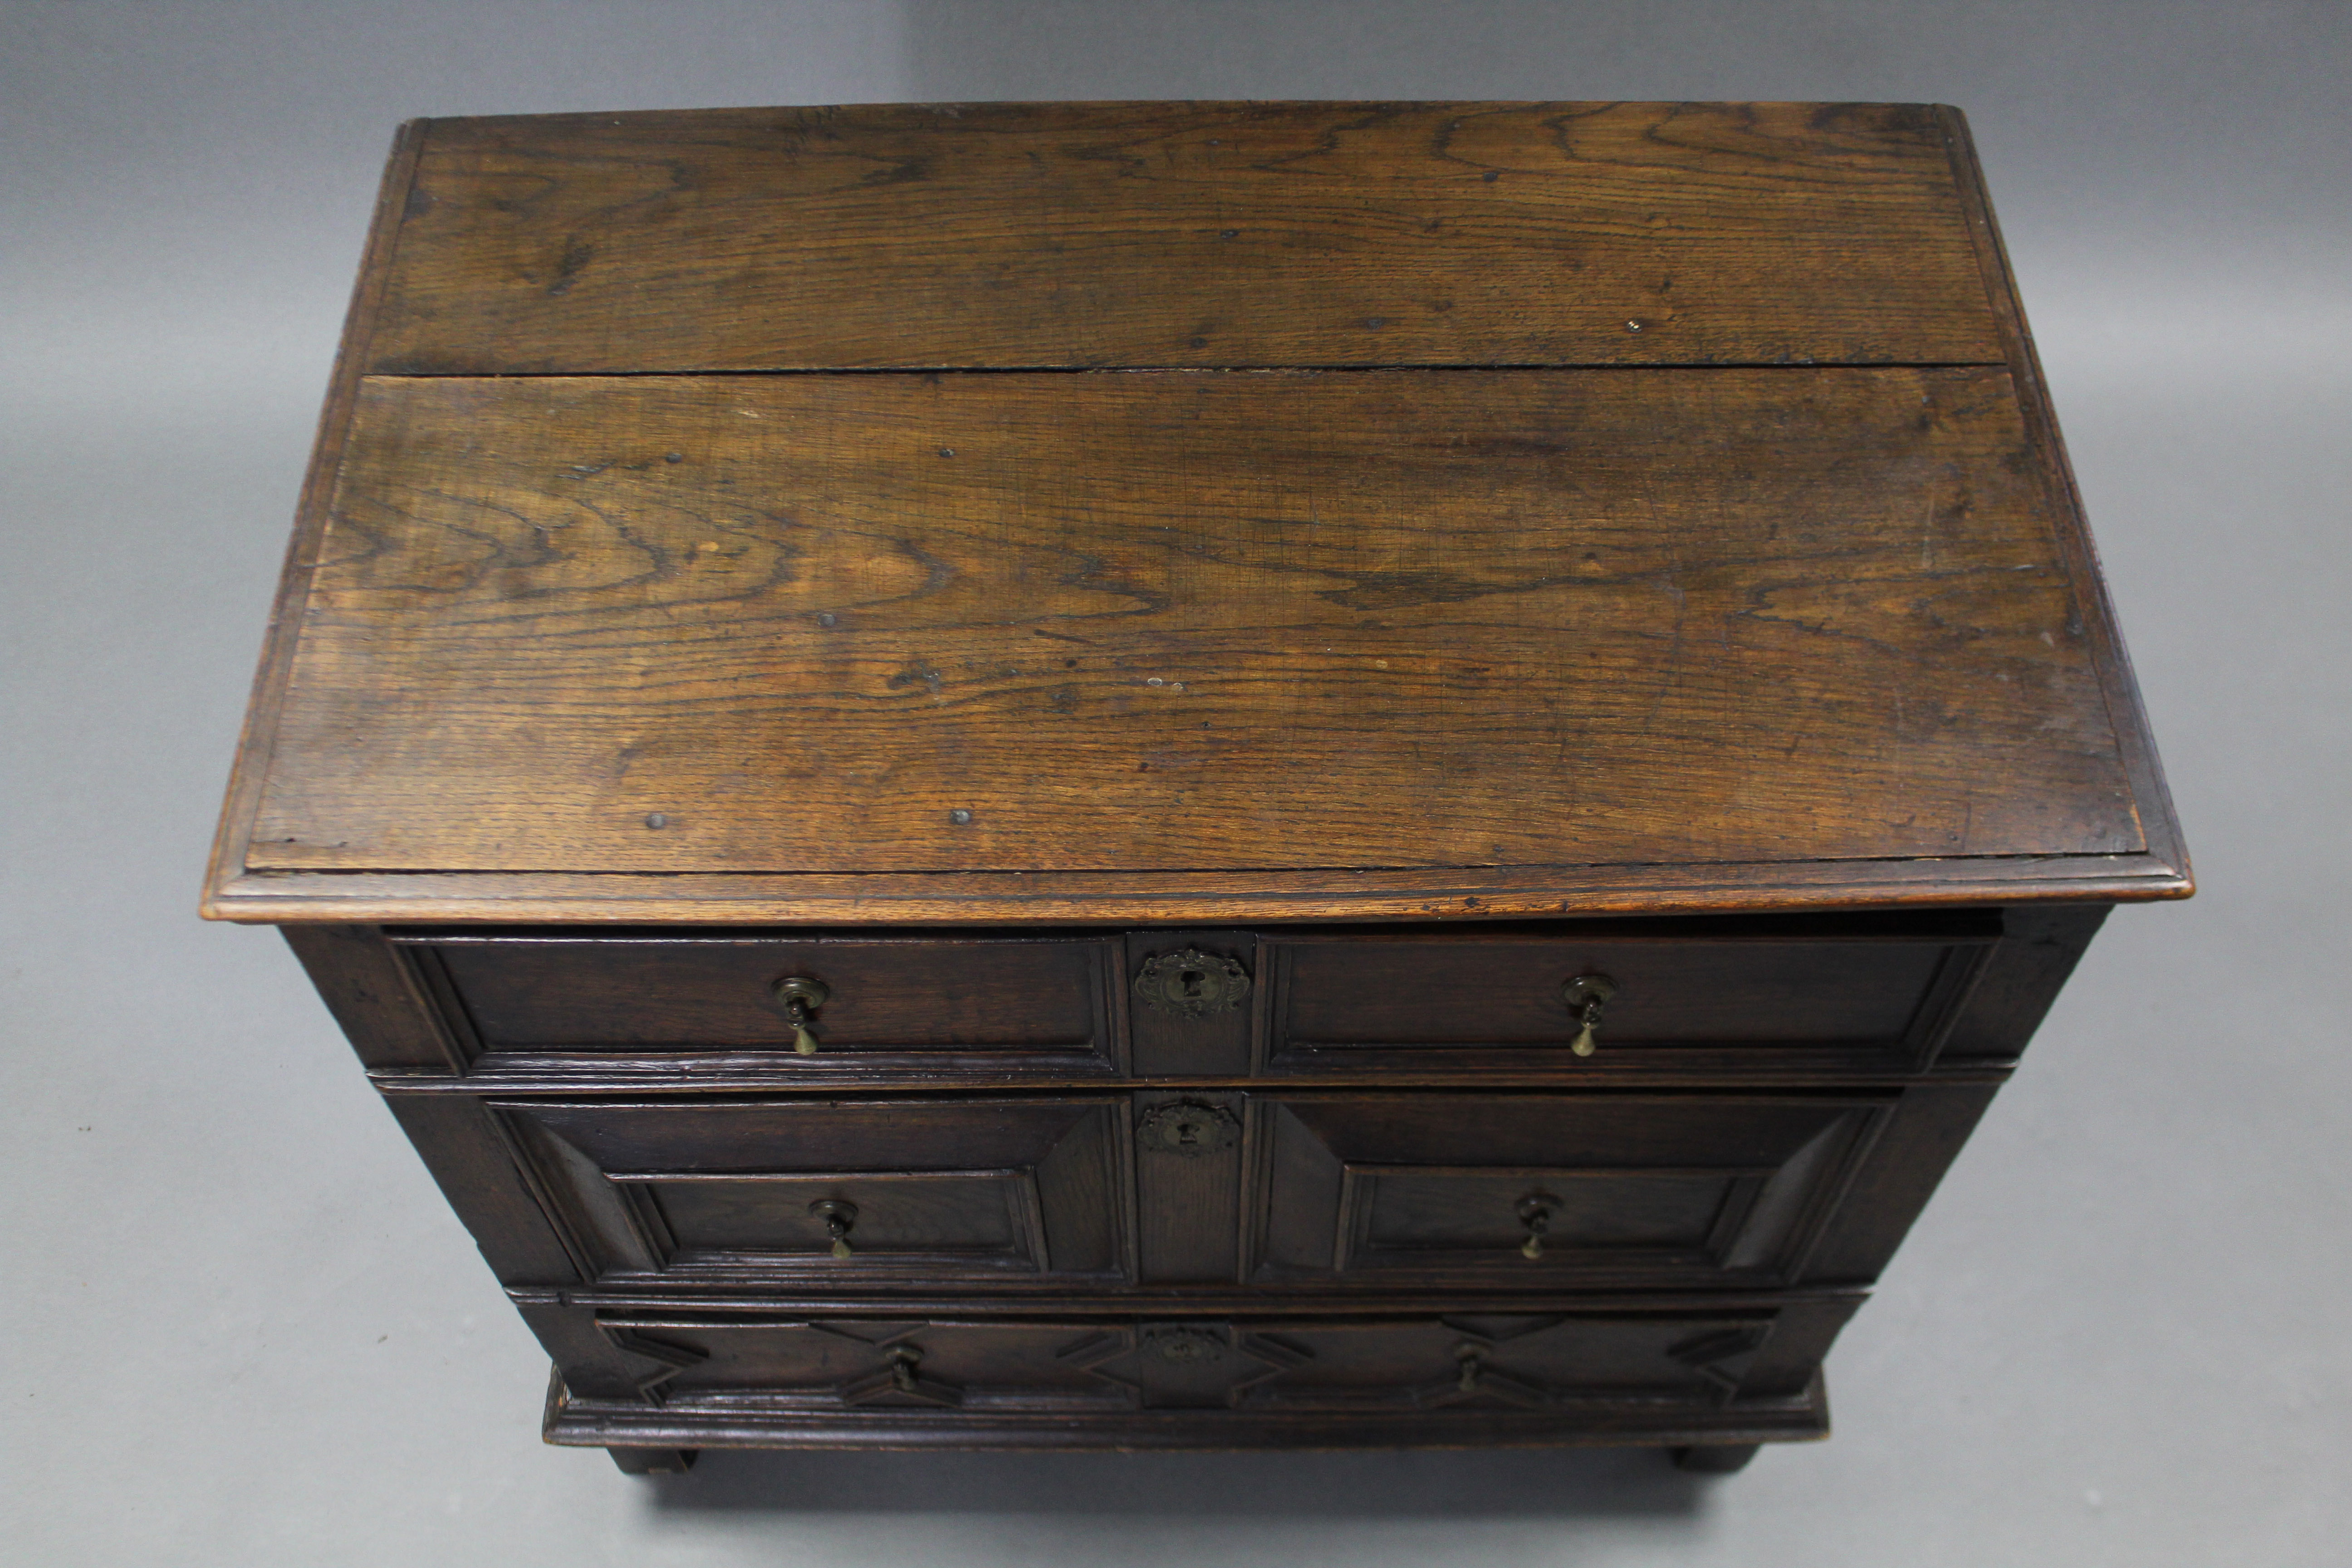 A 17th century OAK JACOBEAN SMALL CHEST, fitted three drawers with applied geometric mouldings & - Image 3 of 5